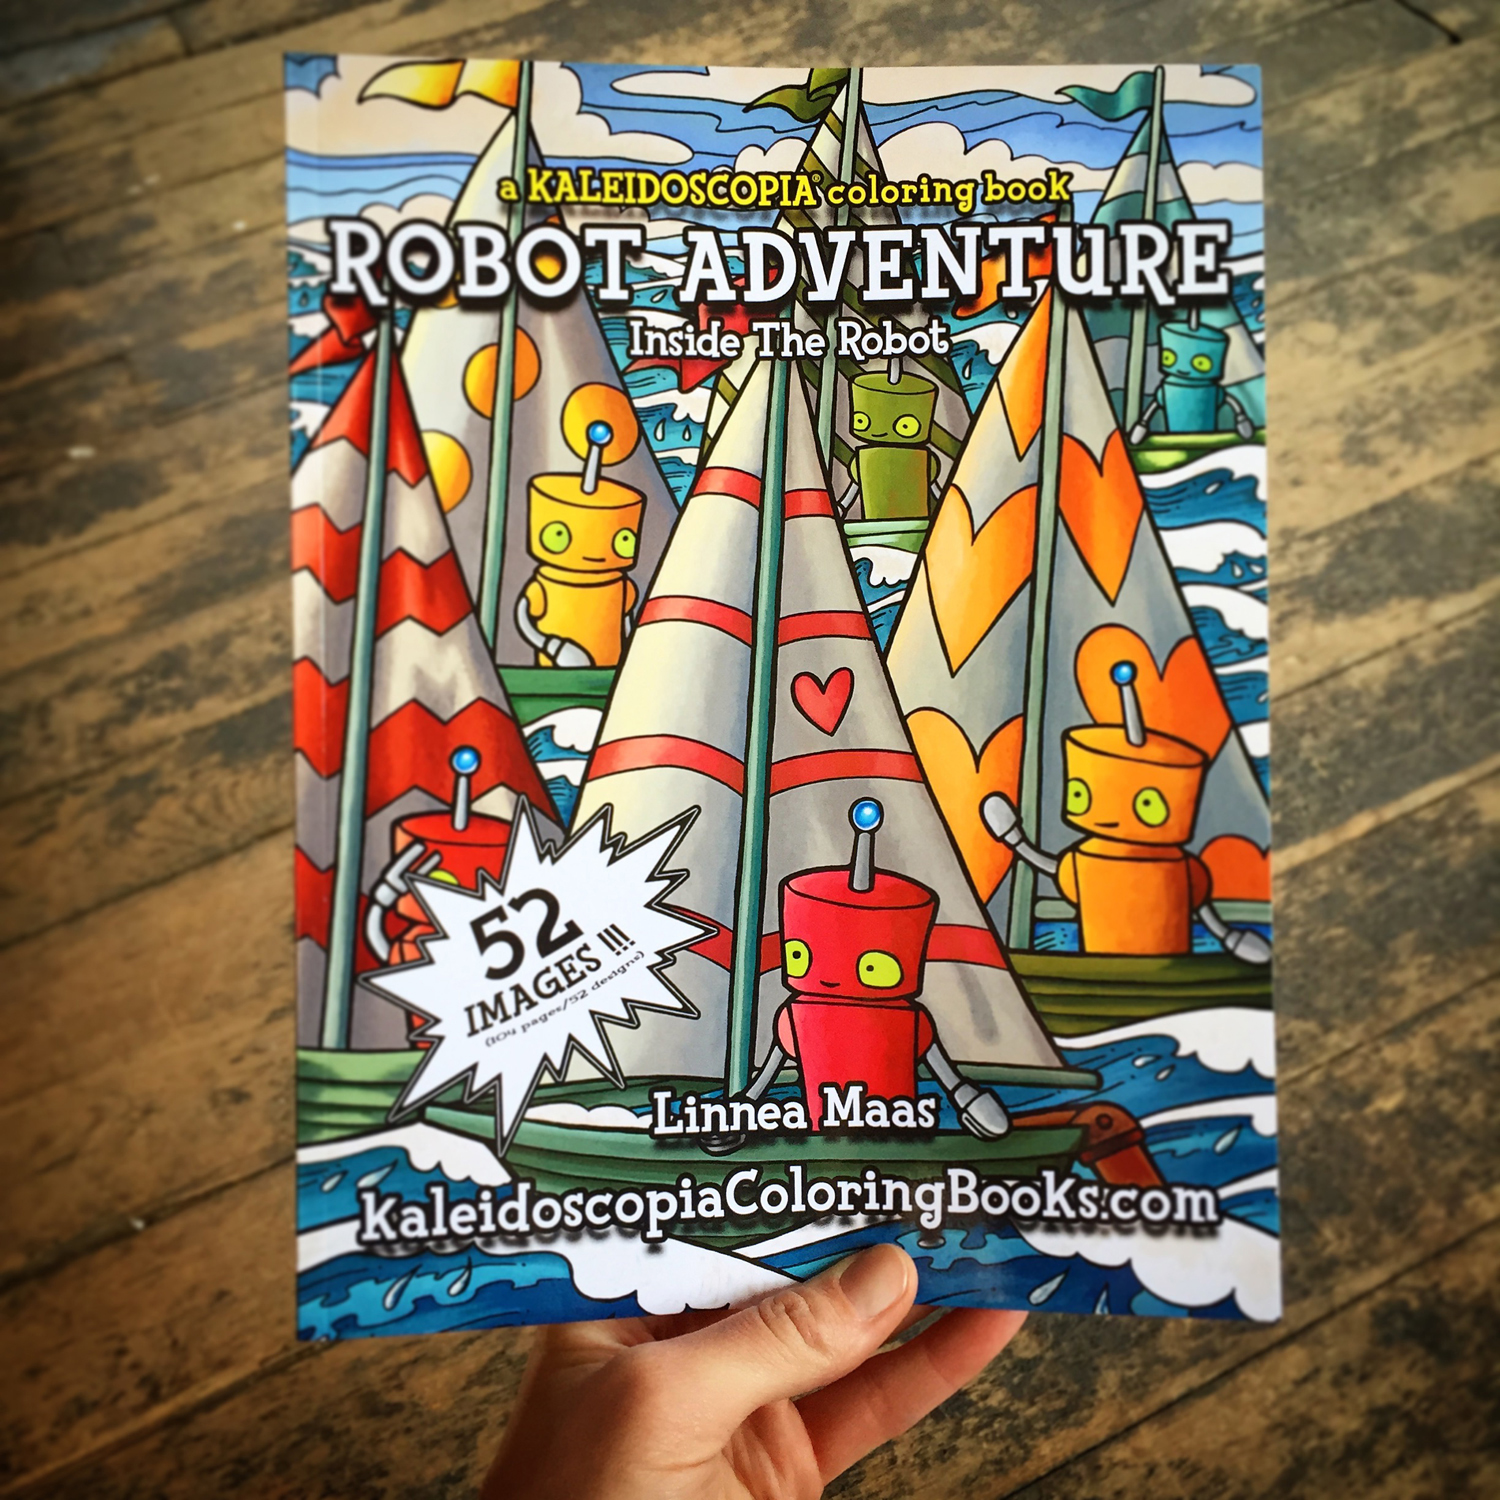 Hand holding a copy of Robot Adventure: Inside The Robot colorin